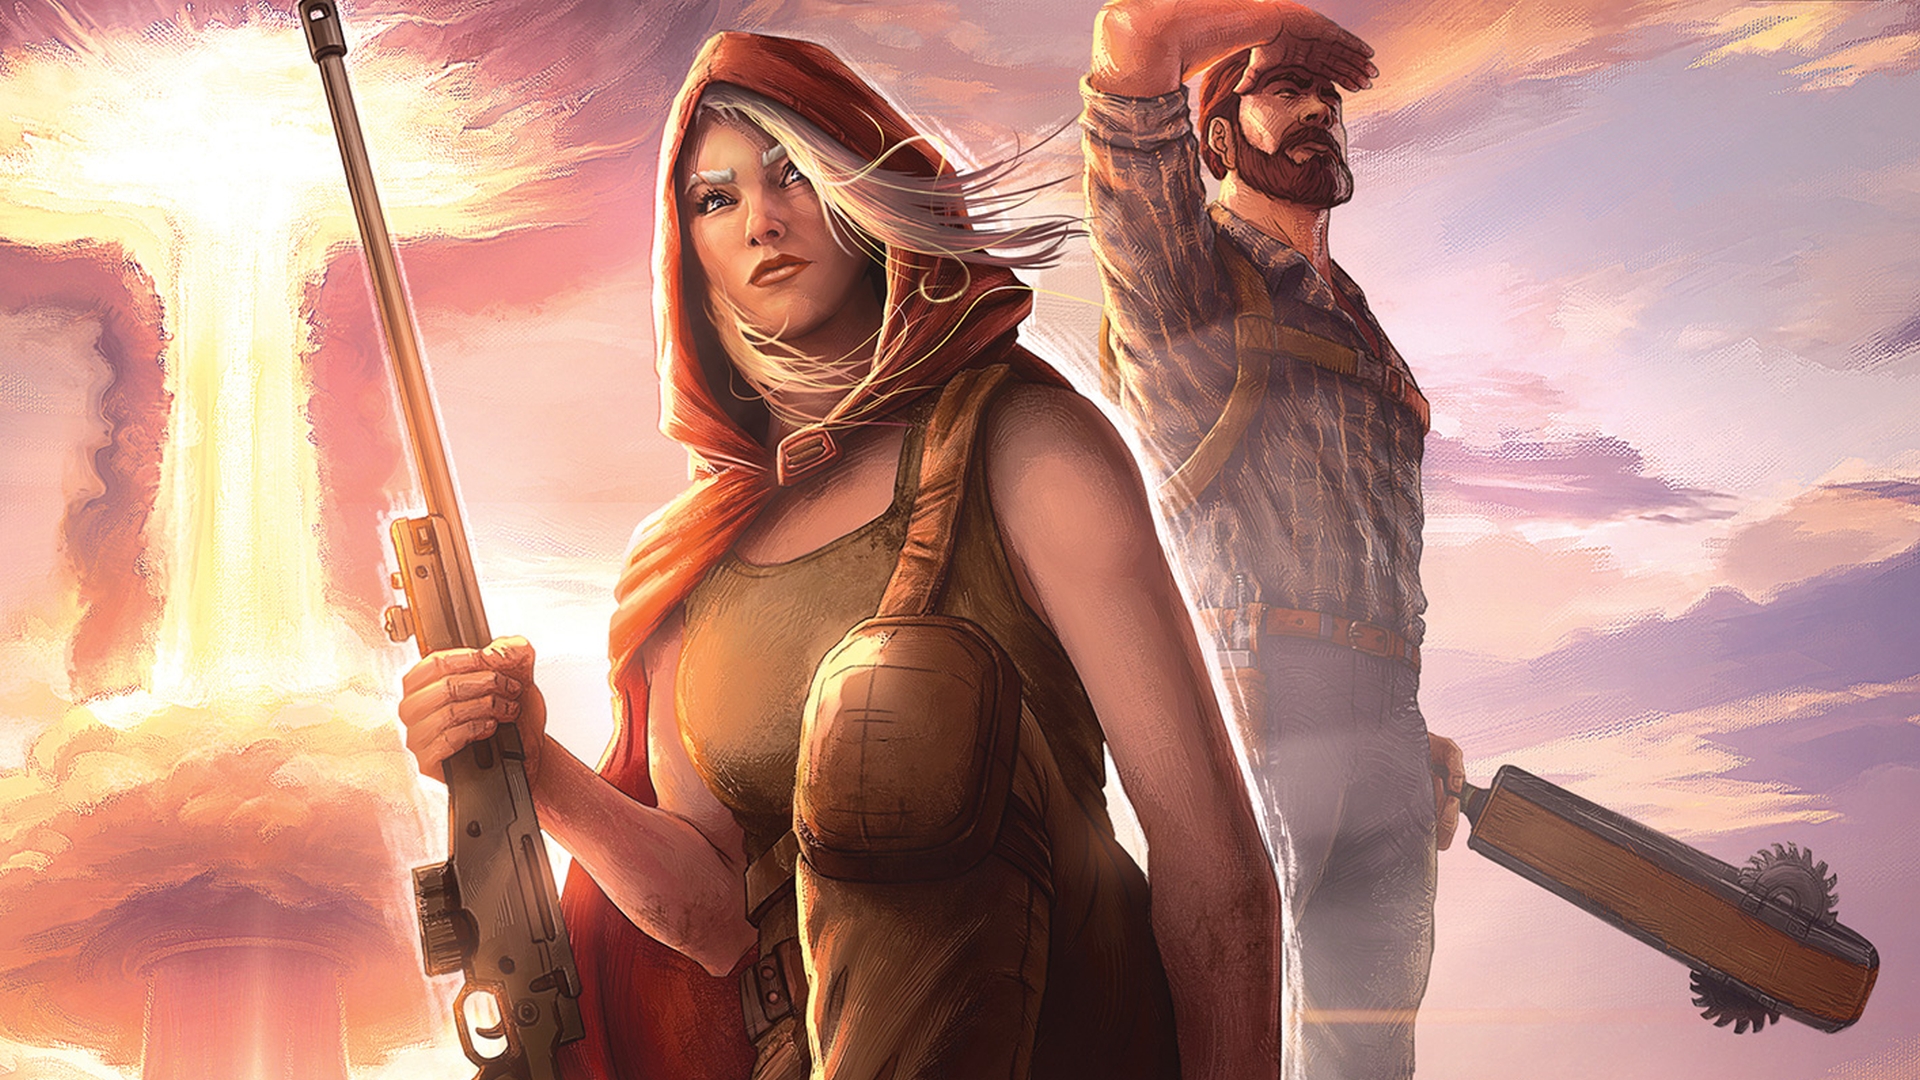  Broken Roads will now mix Mad Max, Disco Elysium, and Baldur's Gate in April release date after last year's out-of-the-blue 5-month delay 